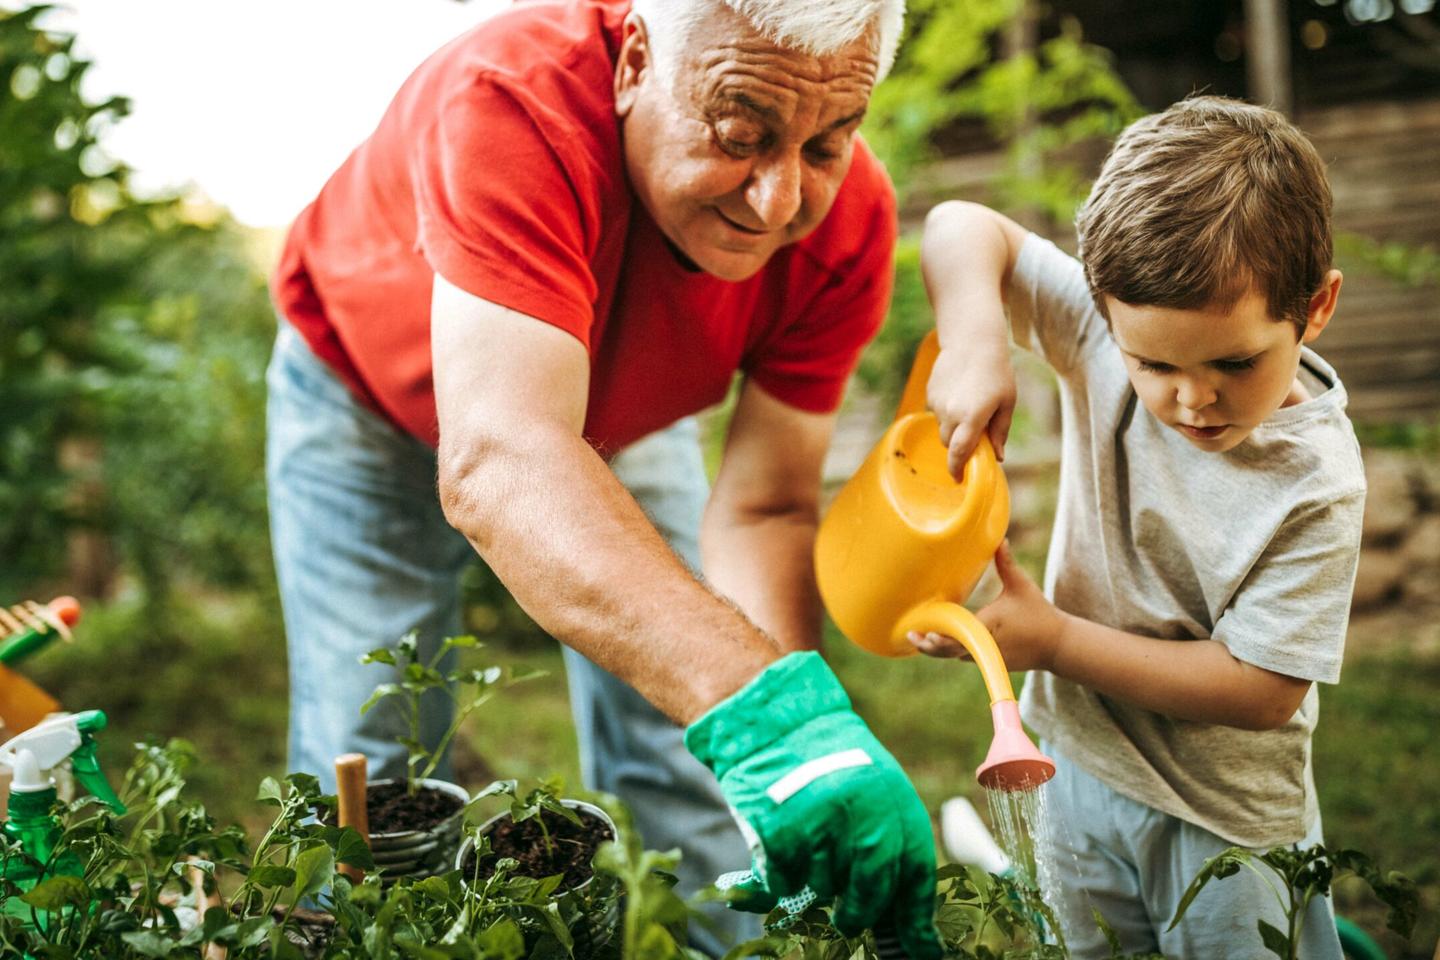 A older man tends to a garden with a young child